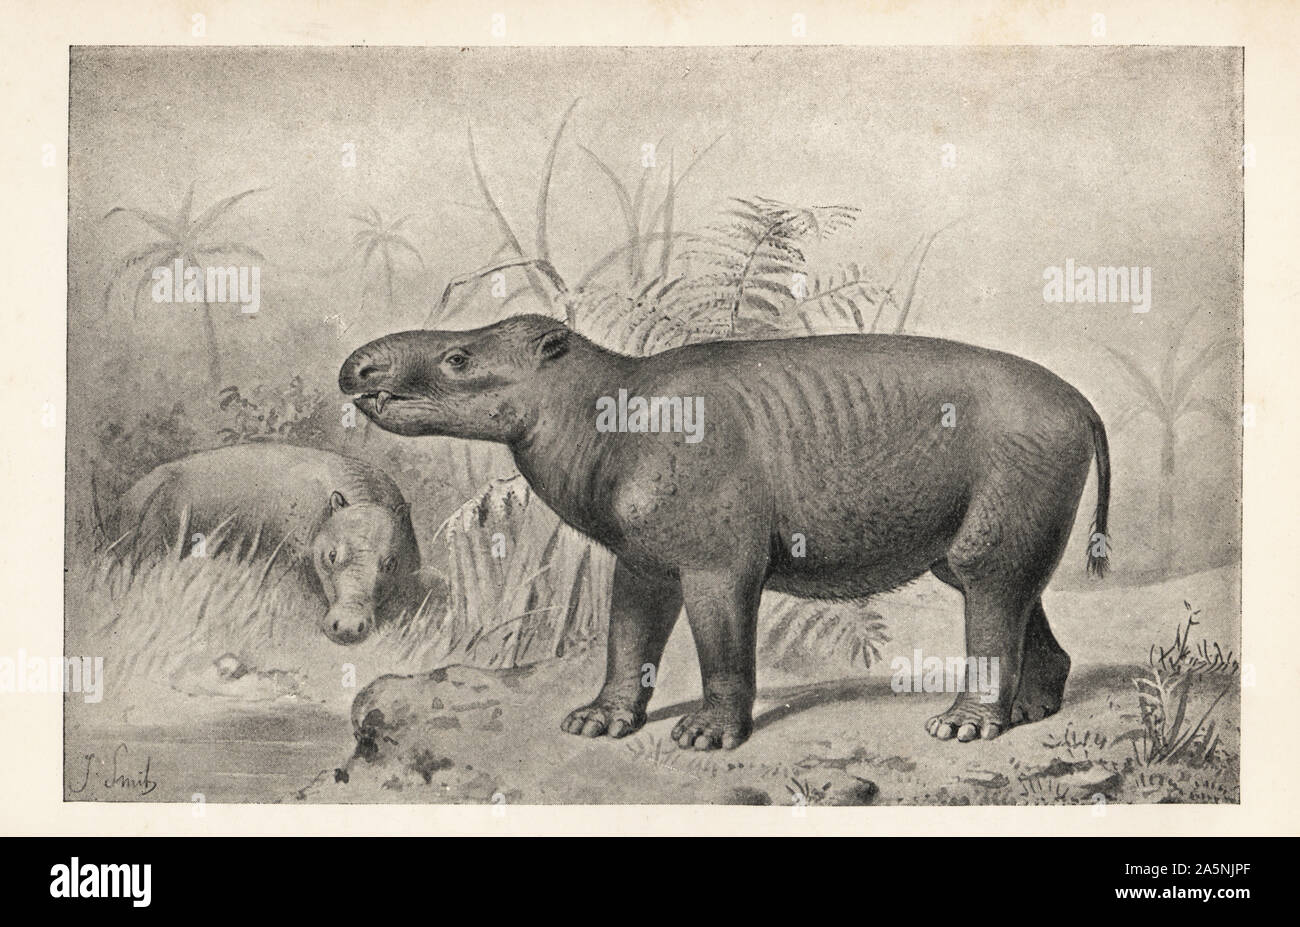 An ancient mammal Coryphodon radians (Coryphodon hamatus), Eocene Period. Print after an illustration by Joseph Smit from Henry Neville Hutchinson’s Creatures of Other Days, Popular Studies in Palaeontology, Chapman and Hall, London, 1896. Stock Photo